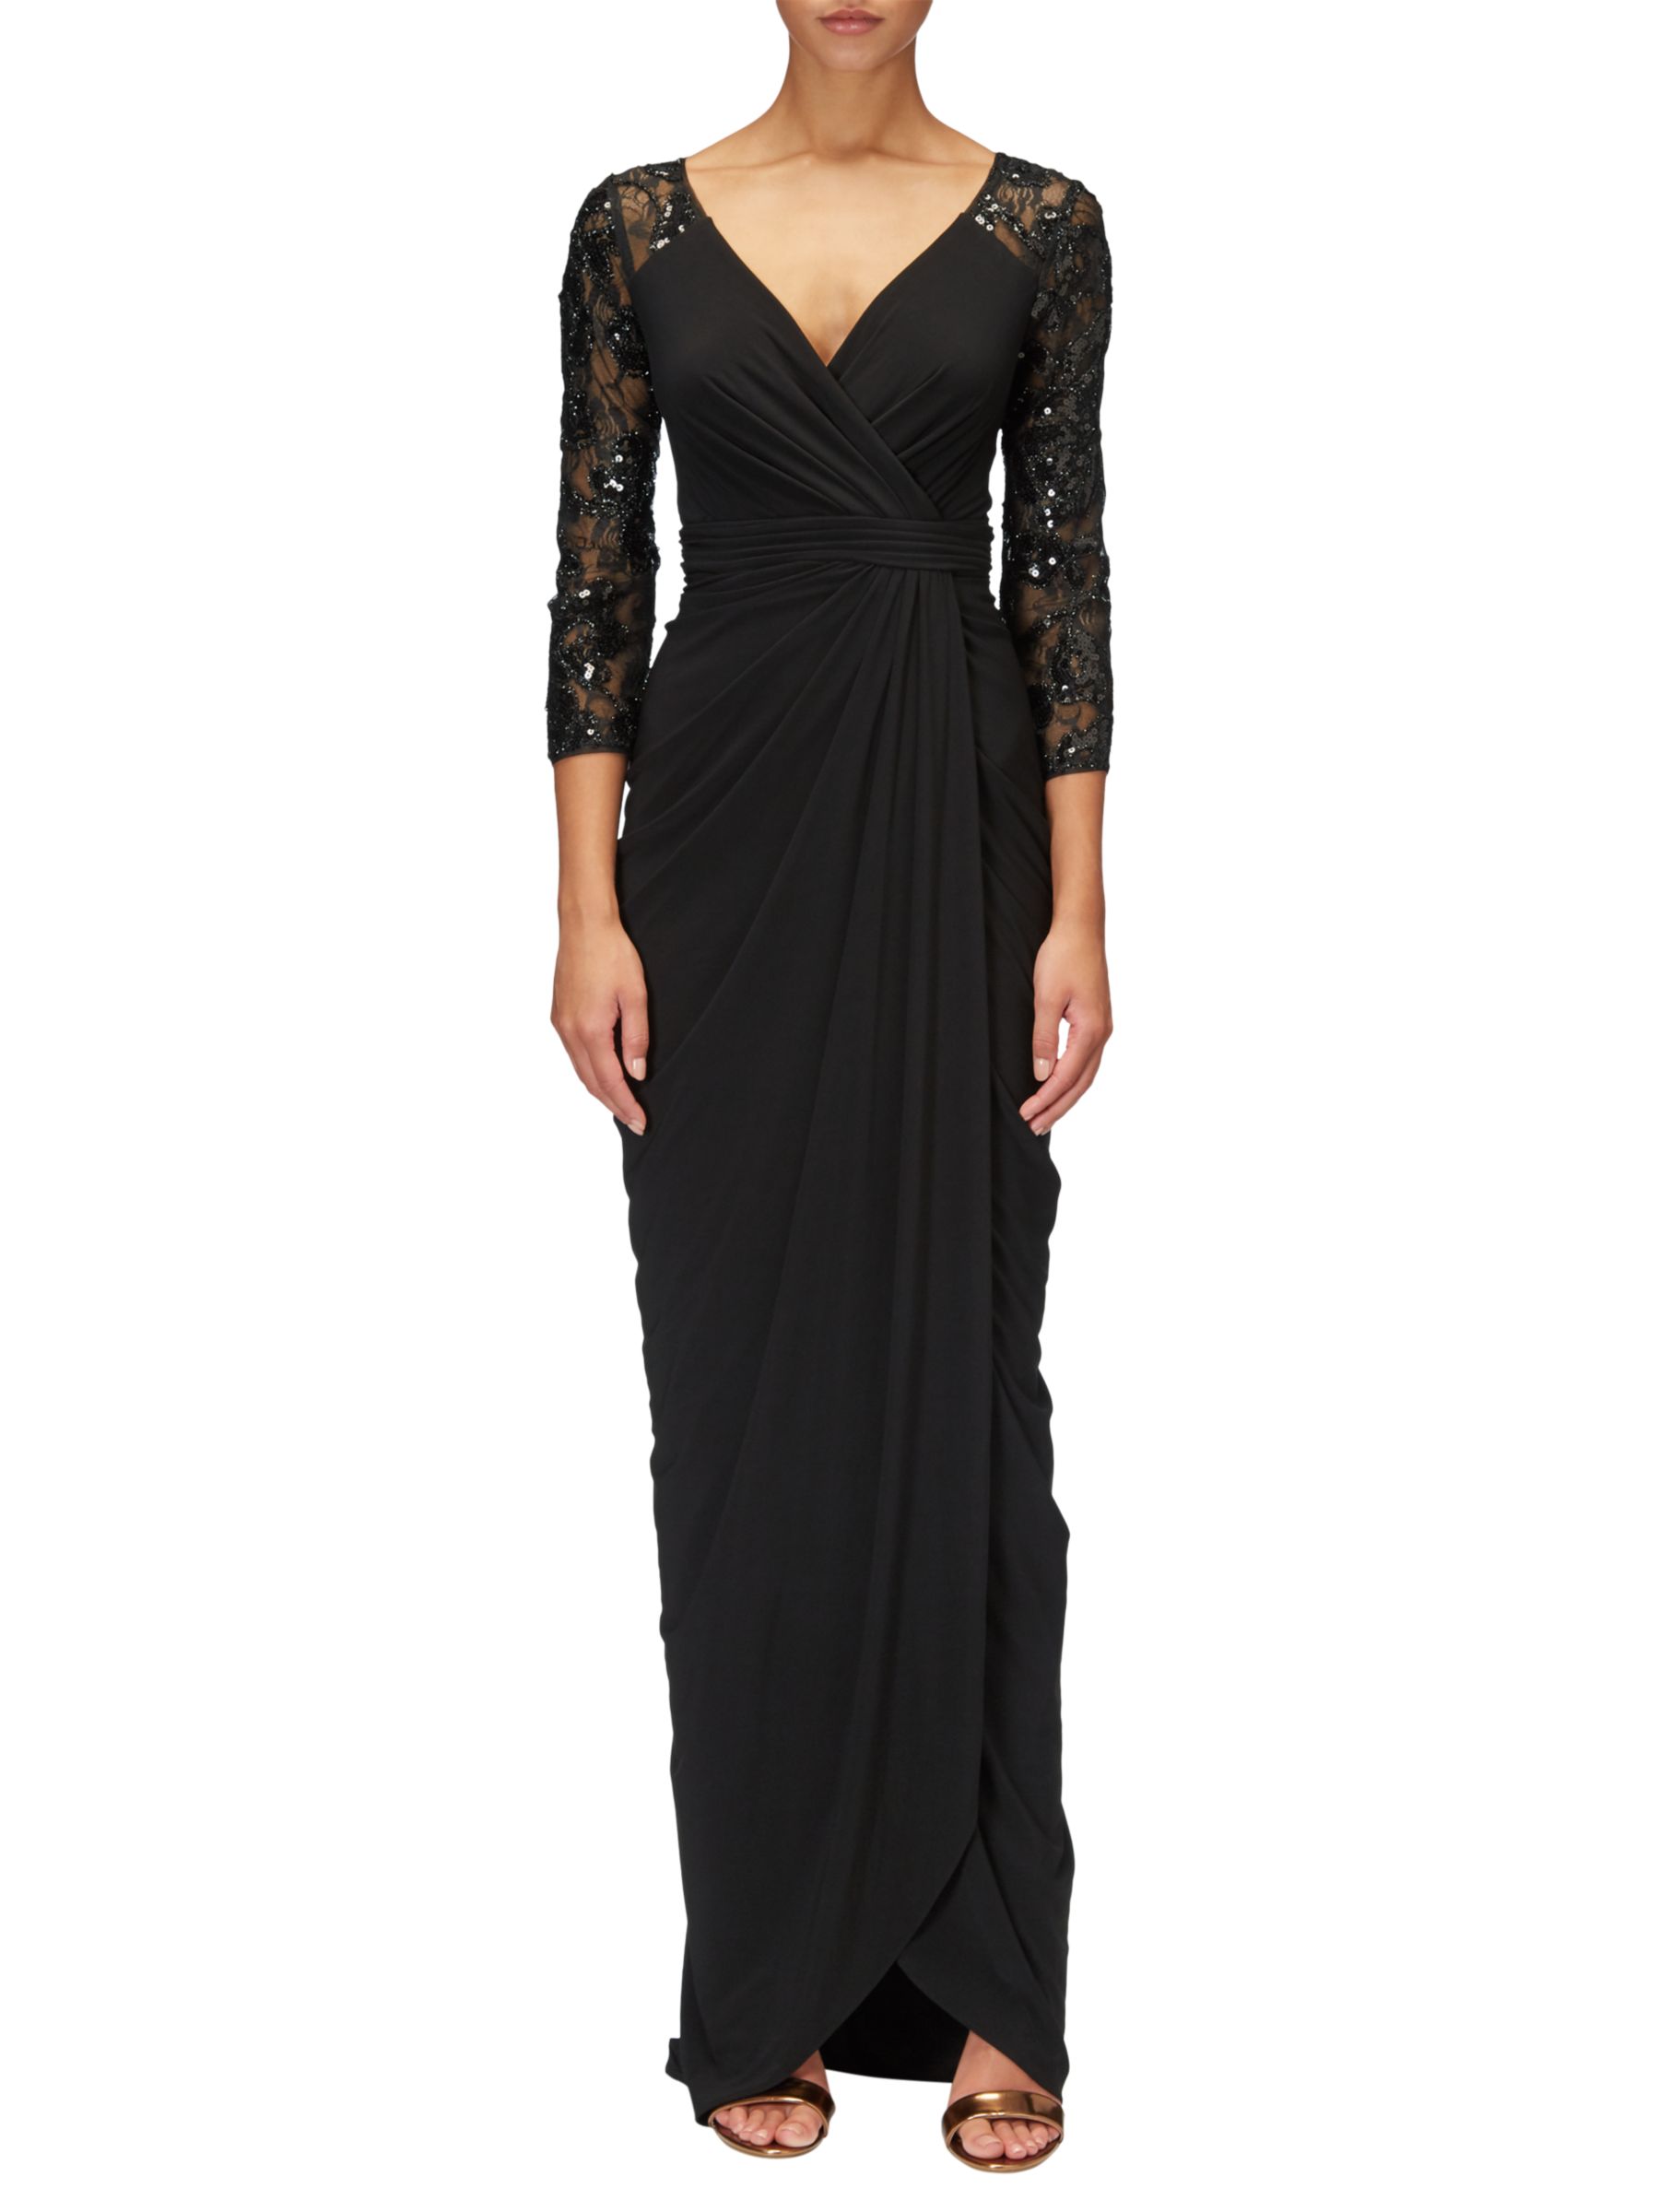 Adrianna Papell Plus Size Lace Sleeved Long Dress, Black at John Lewis ...